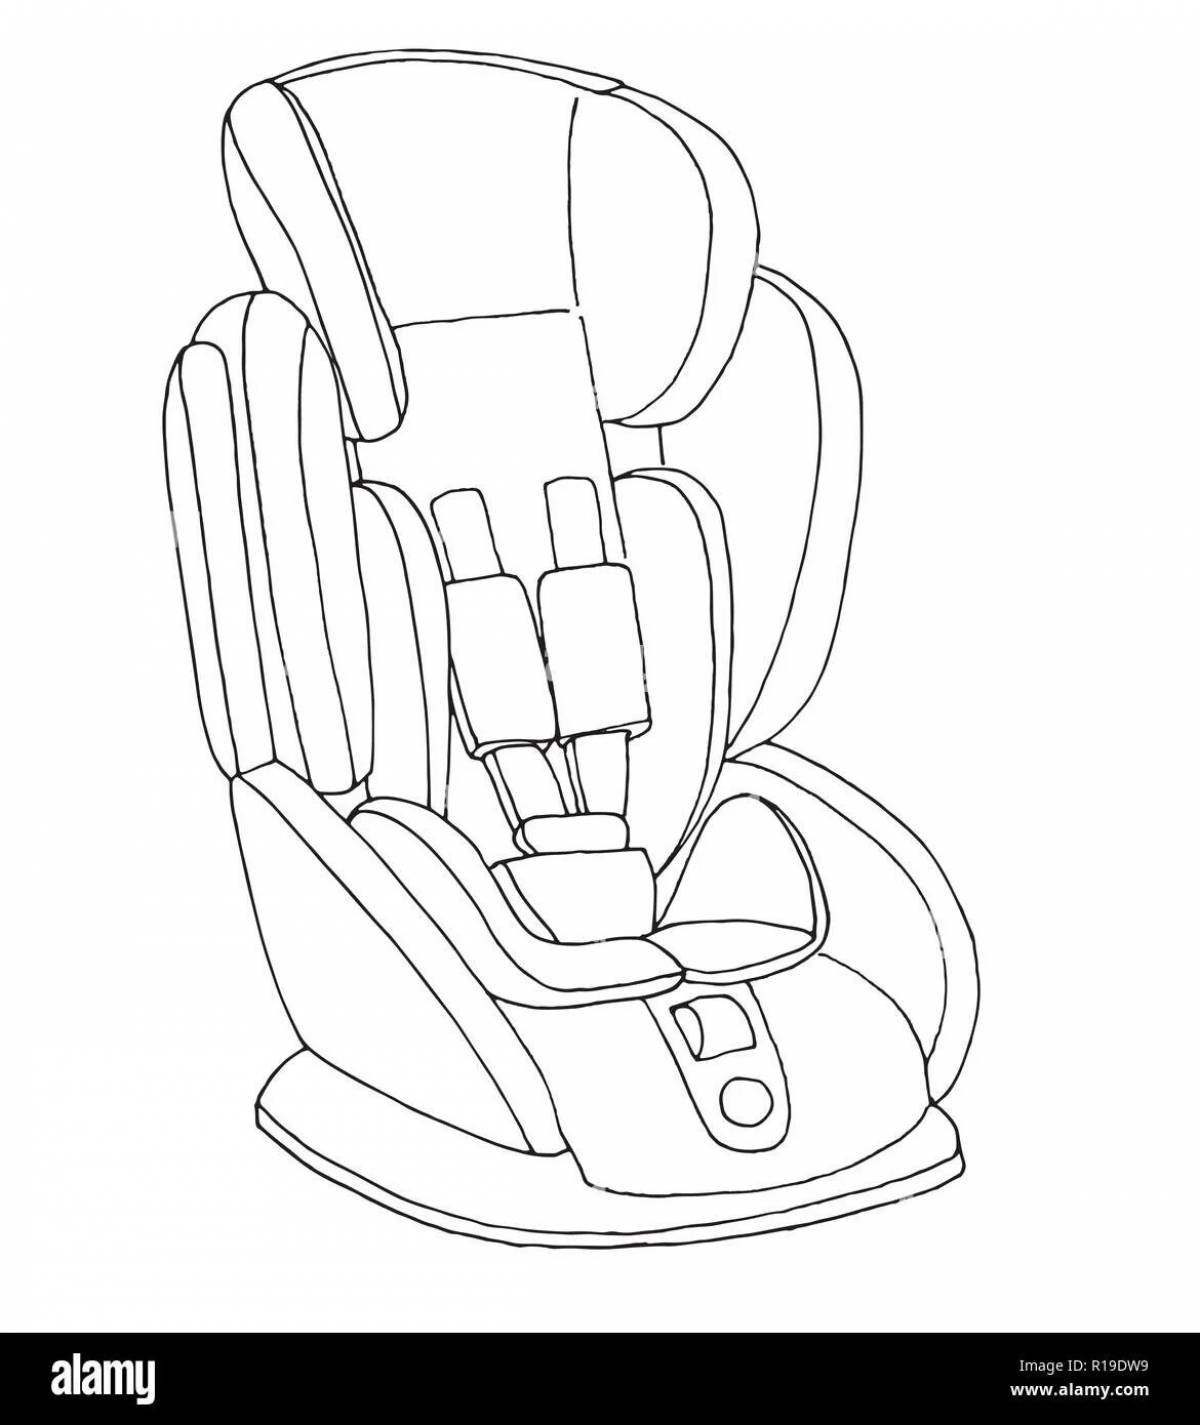 Coloring page gentle car seat